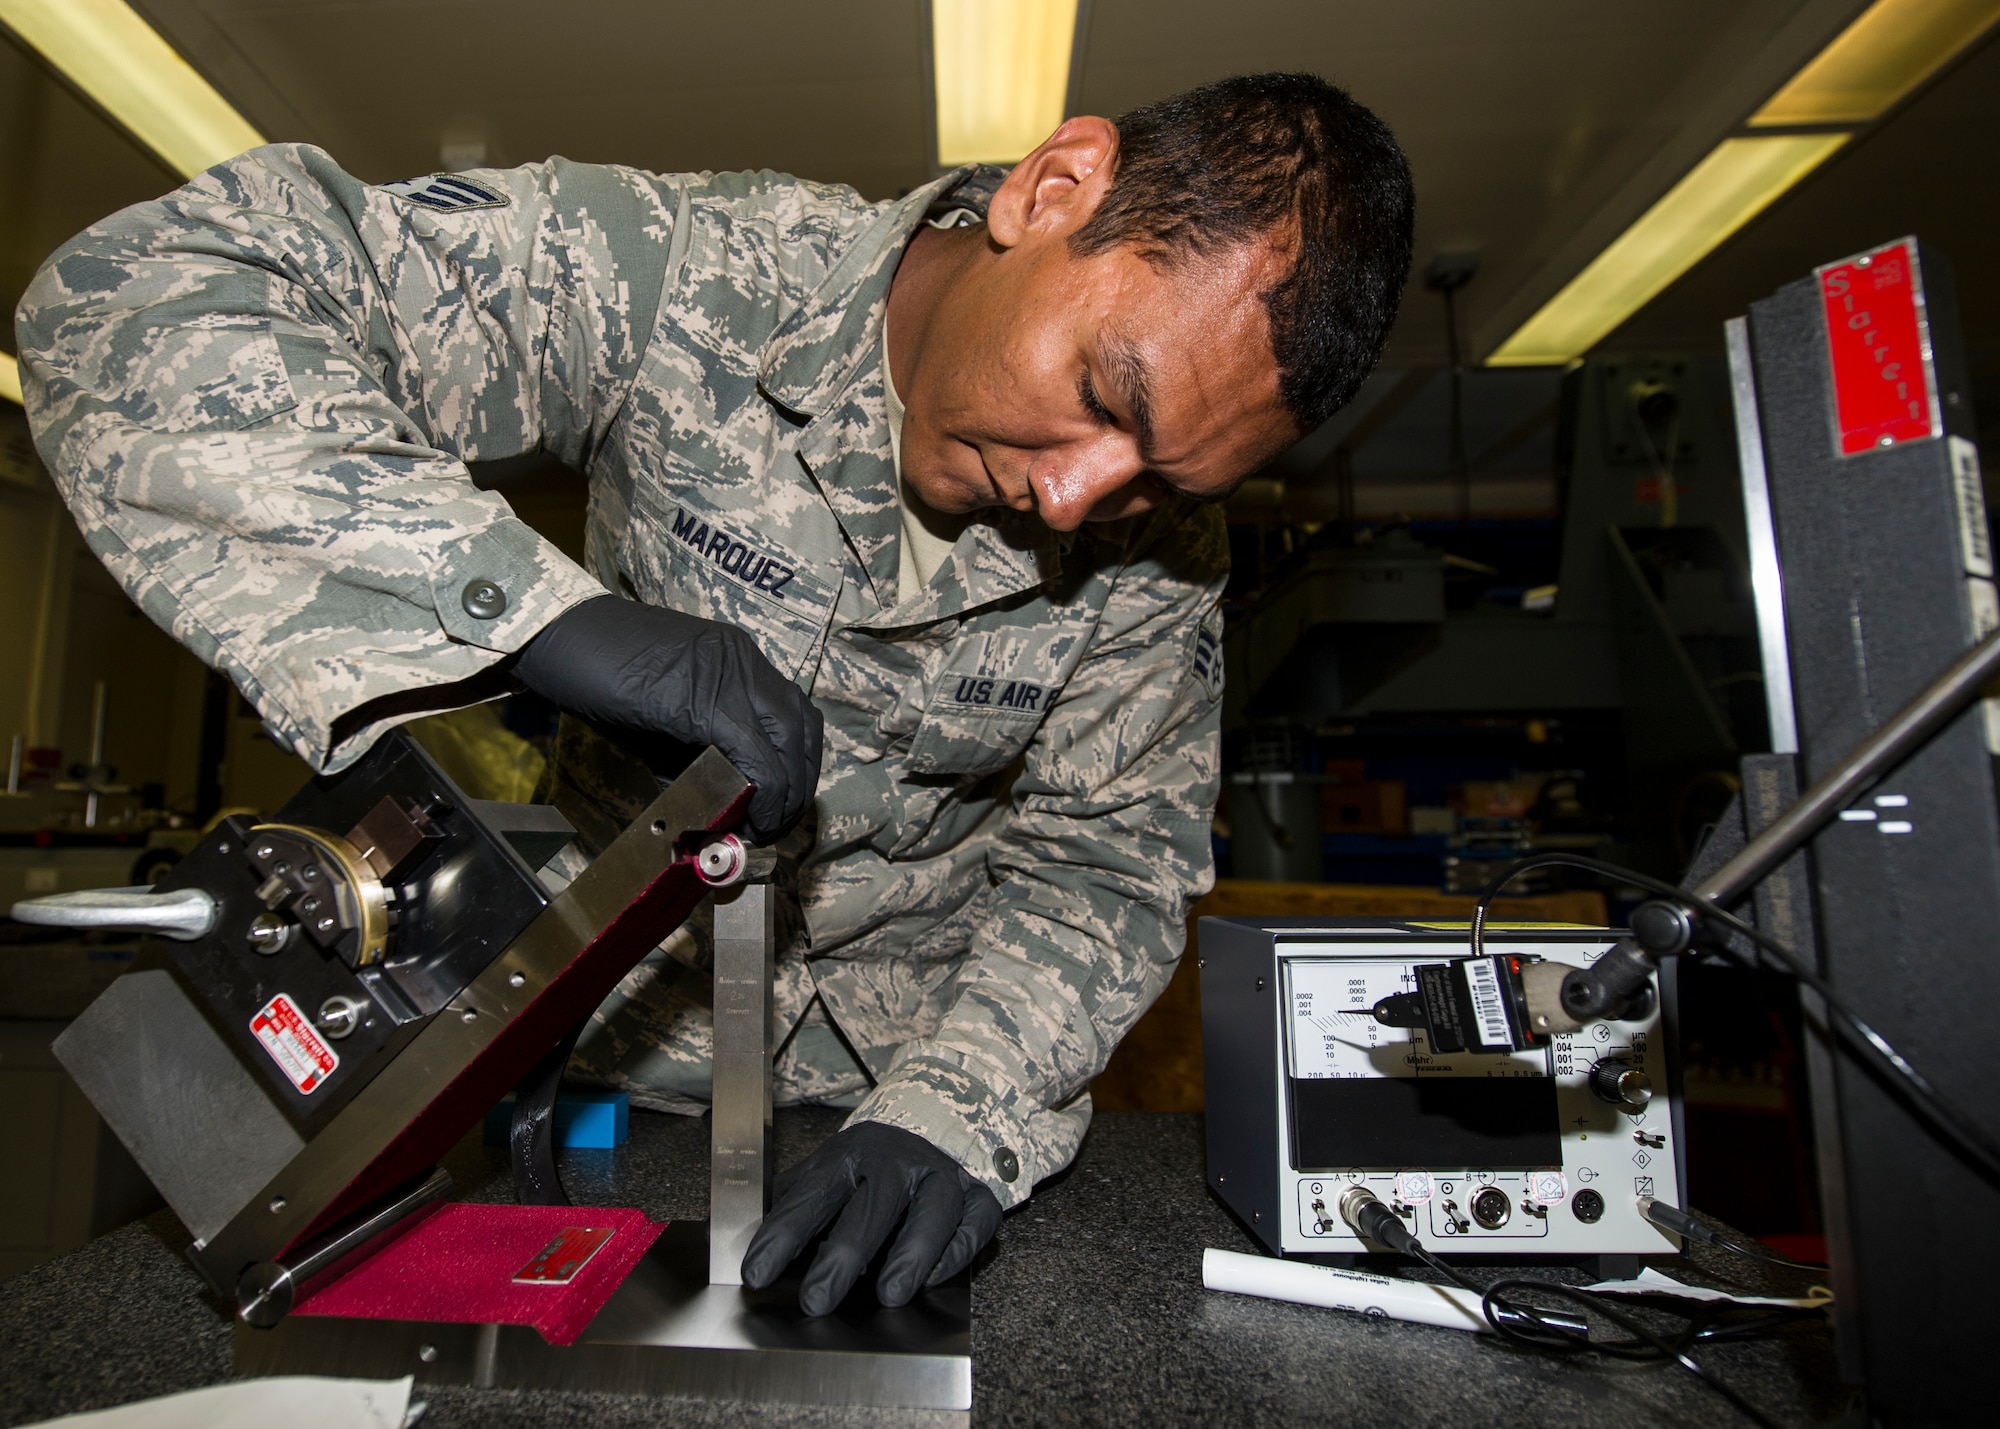 Senior Airman Troy Marquez, 49th Maintenance Squadron Precision Measurement Equipment Laboratory technician, creates a 45 degree angle to use as a reference to check levels at Holloman Air Force Base, N.M. May 28, 2015. Levels are marked with hash marks, which indicate a deviation from a horizontal reference point. Levels are often used in construction and are essential in ensuring building equipment are created at proper angles to ensure safe, sturdy building. (U.S. Air Force photo by Airman 1st Class Emily A. Kenney/Released)